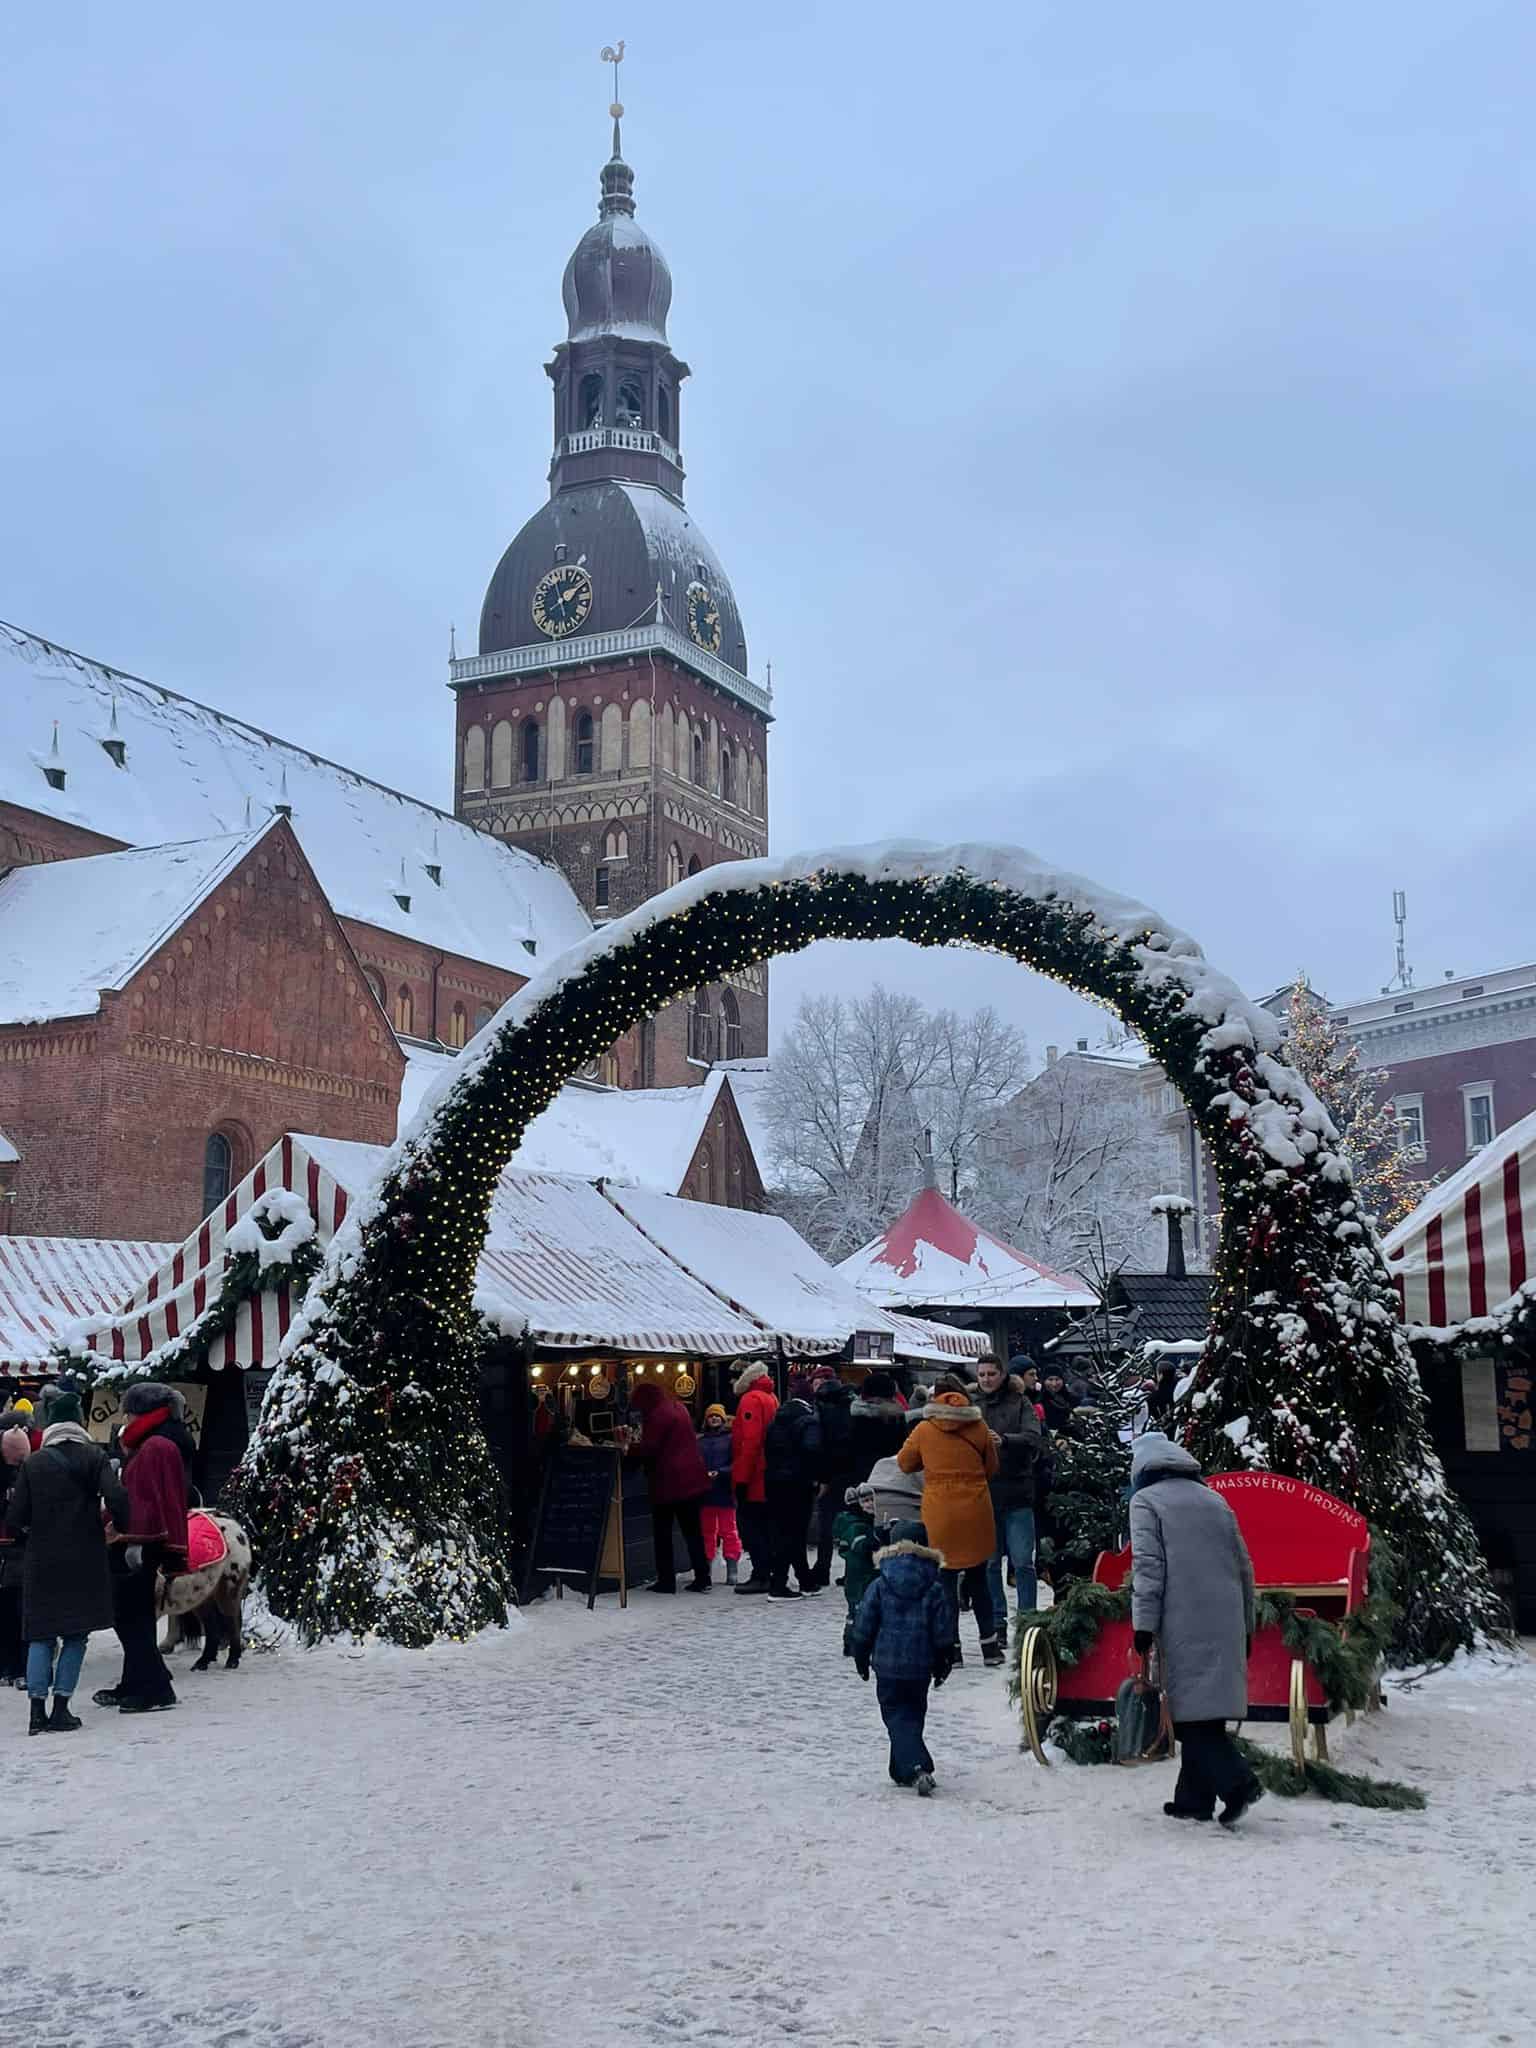 Christmas markets in central Riga with an arch standing over the entrance and snow on surrounding buildings